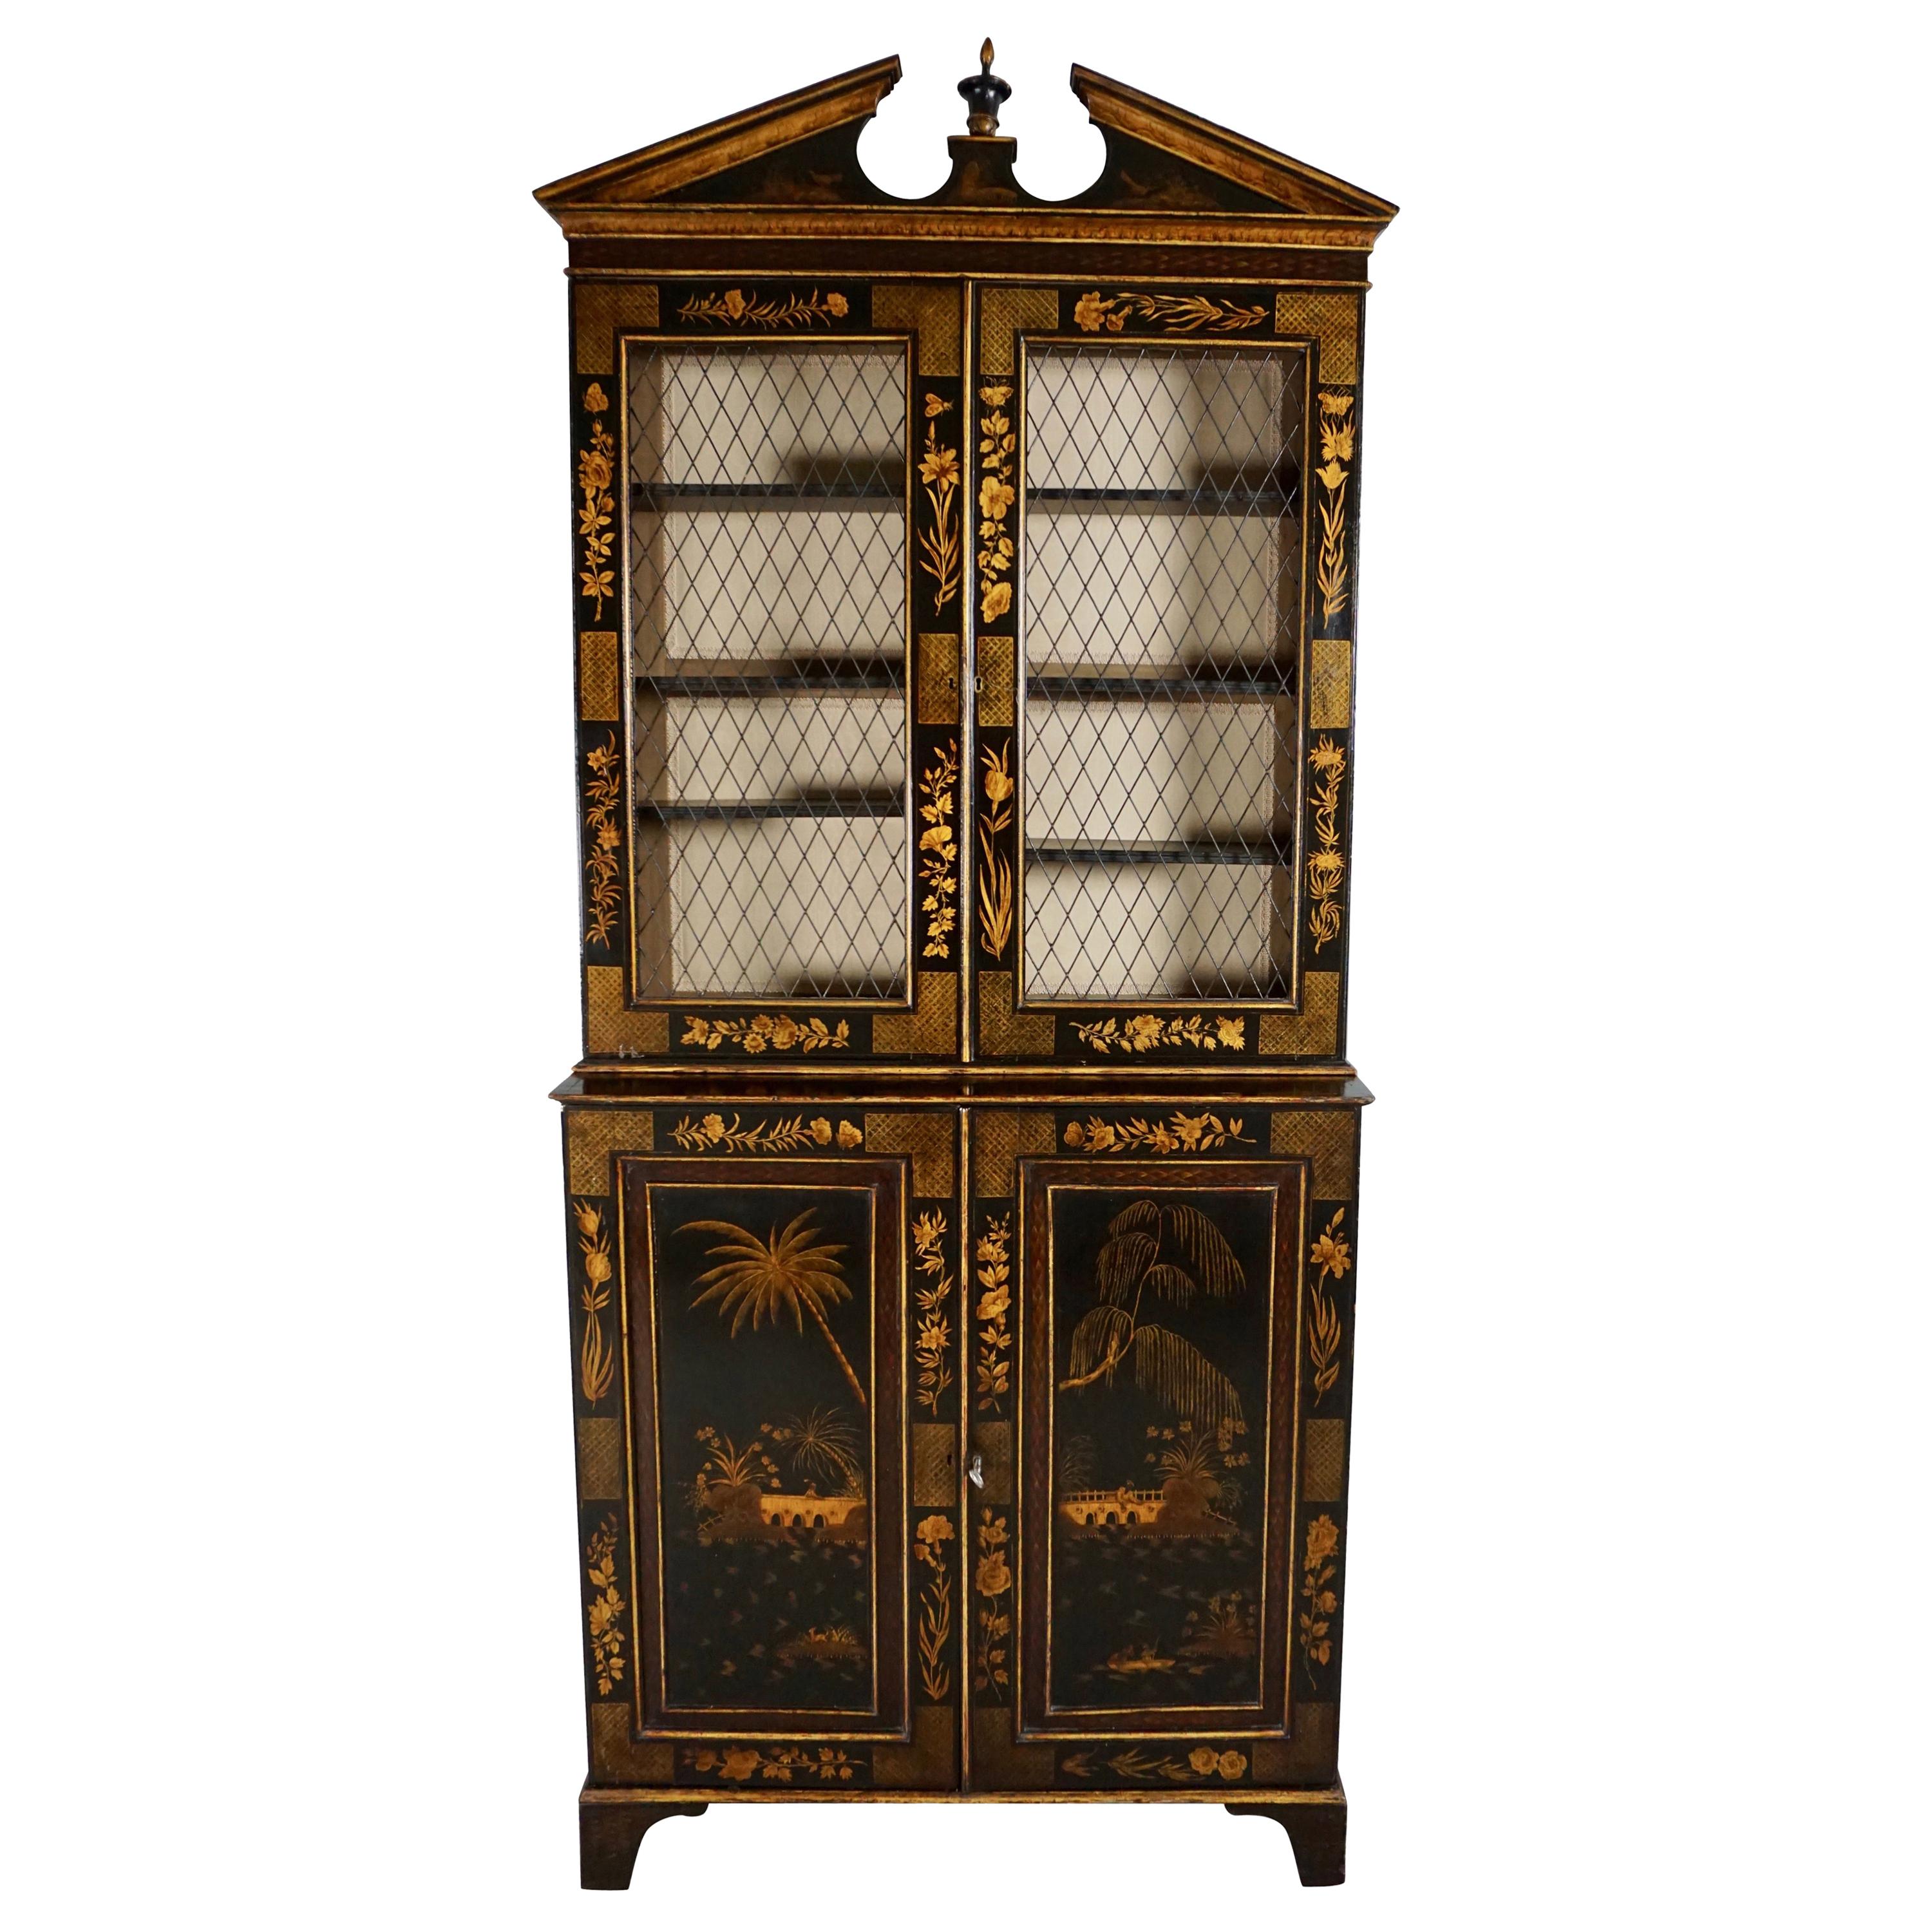 English Regency Chinoiserie Black and Gilt Bookcase Cabinet